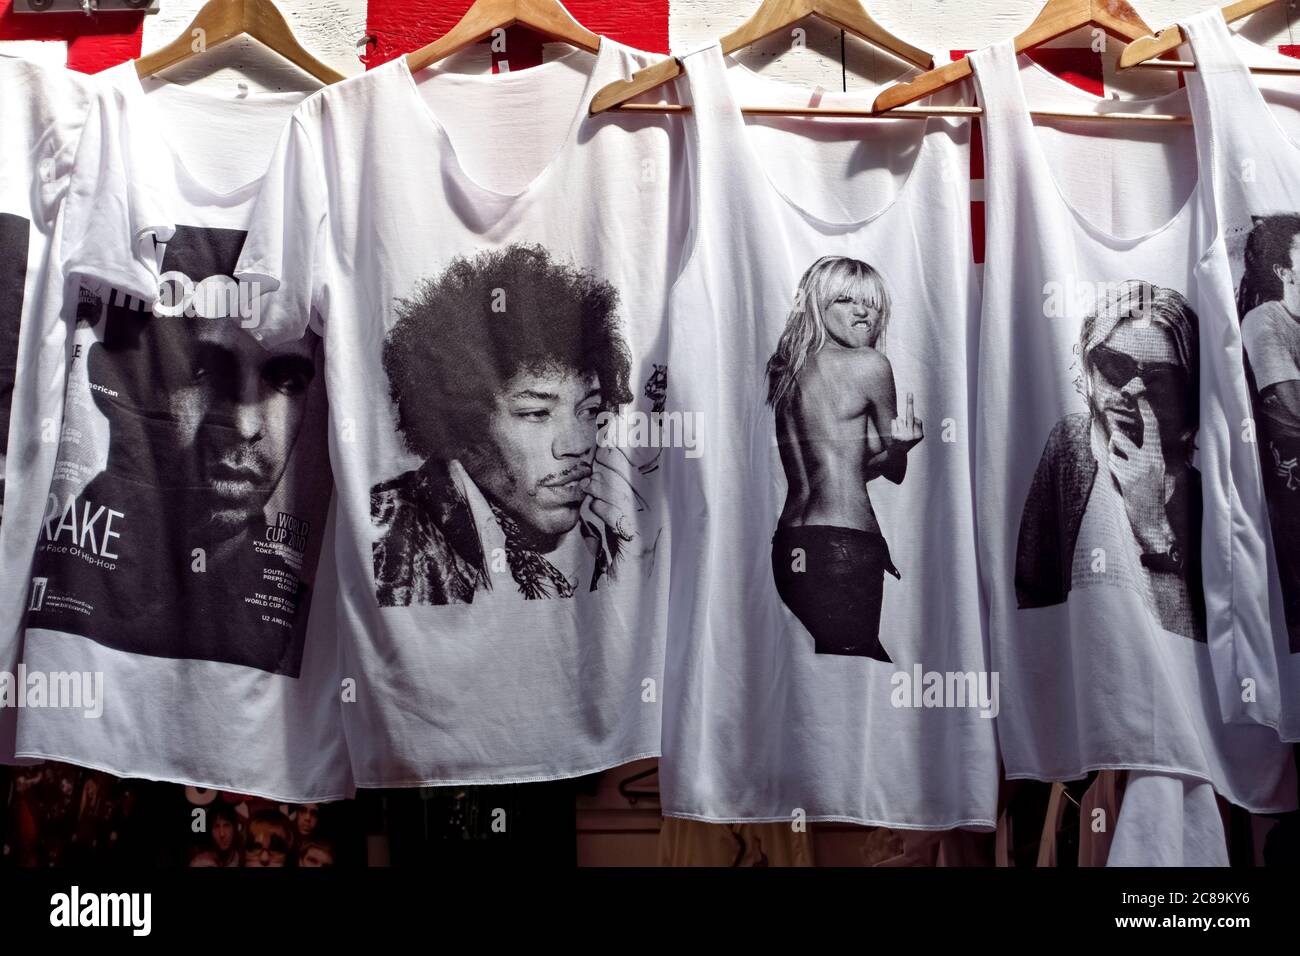 WhiteT shirts with printed rock stars, on display for sale. Fashion casual clothes. Close up, detail. Stock Photo